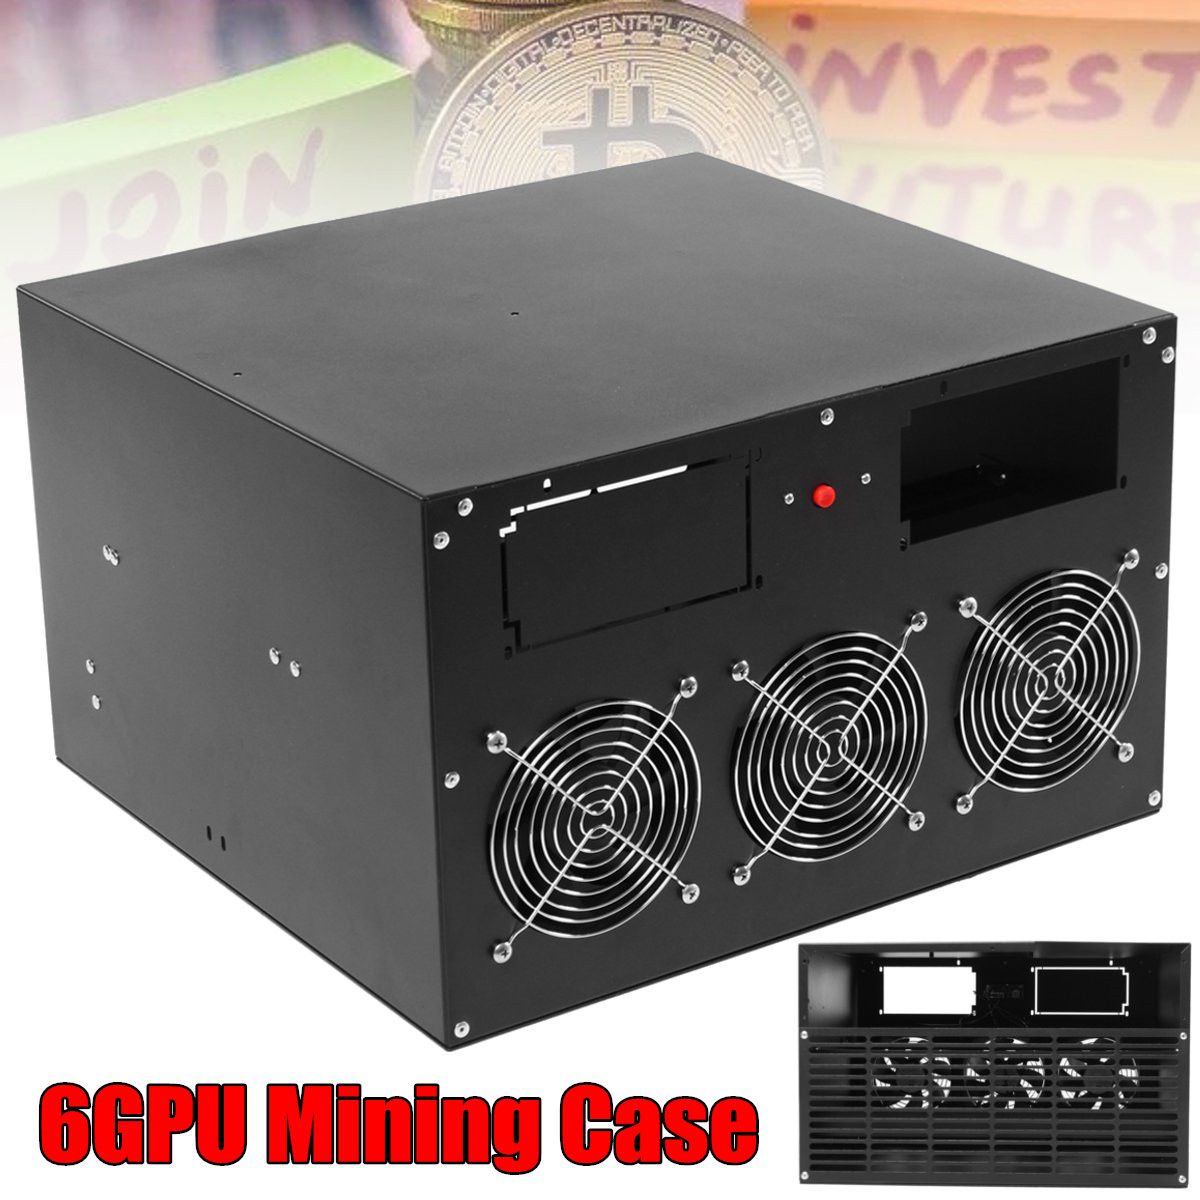 6-GPU-Coin-Miner-Minning-Case-Miner-Mining-Frame-Case-Mining-Rig-Case-with-3-Fans-1269872